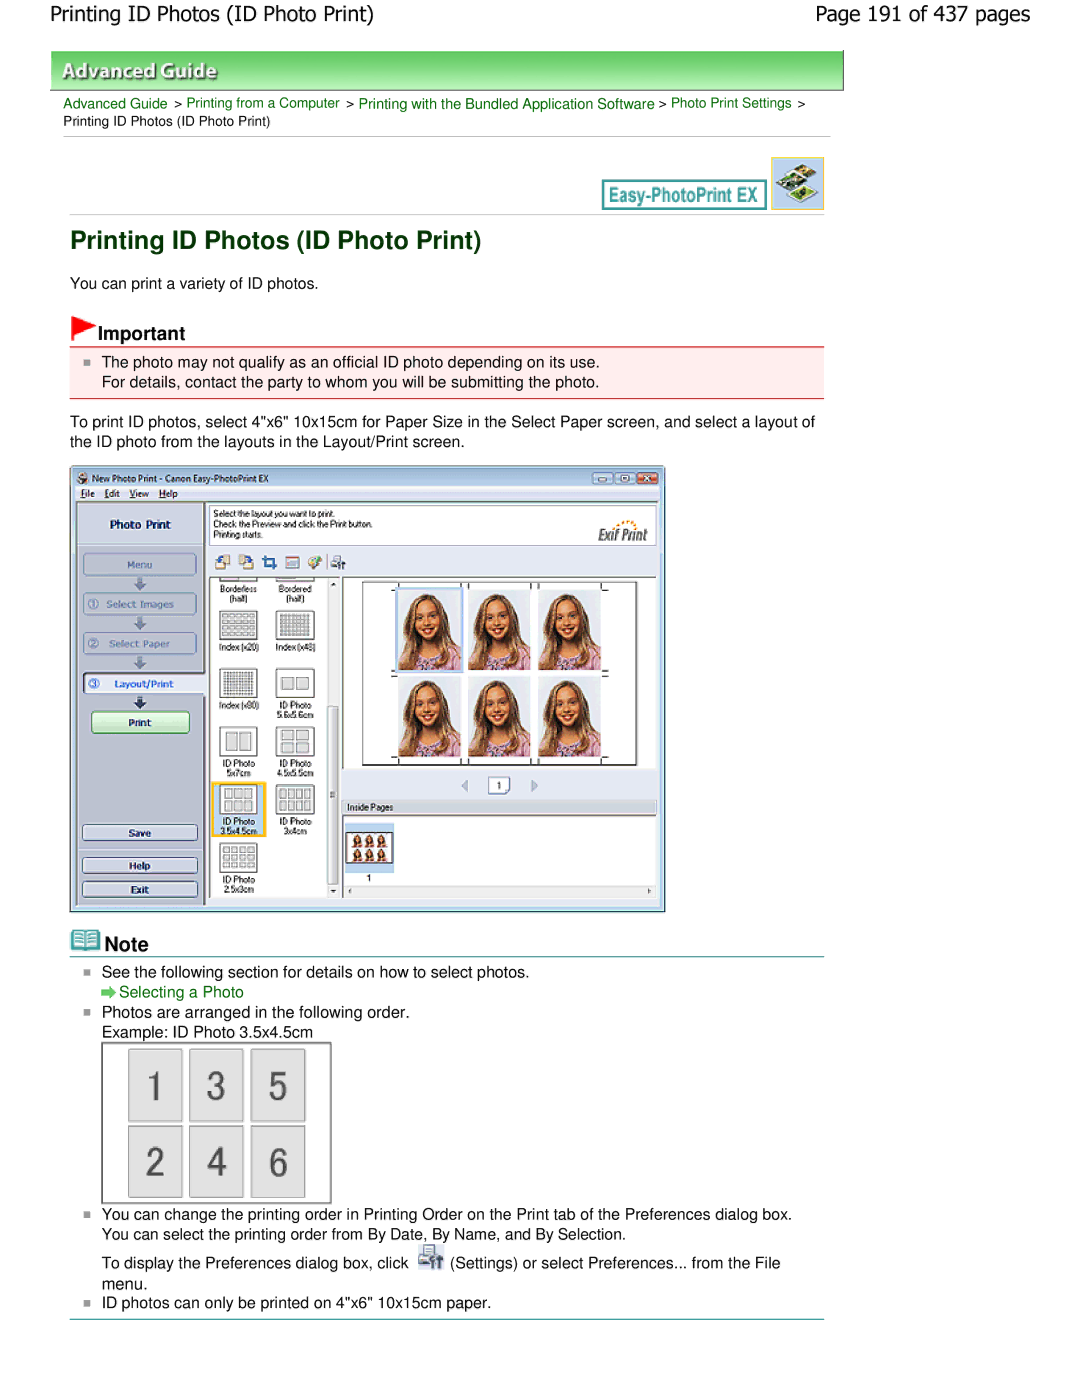 Canon iP4700 manual Printing ID Photos ID Photo Print, 191 of 437 pages 